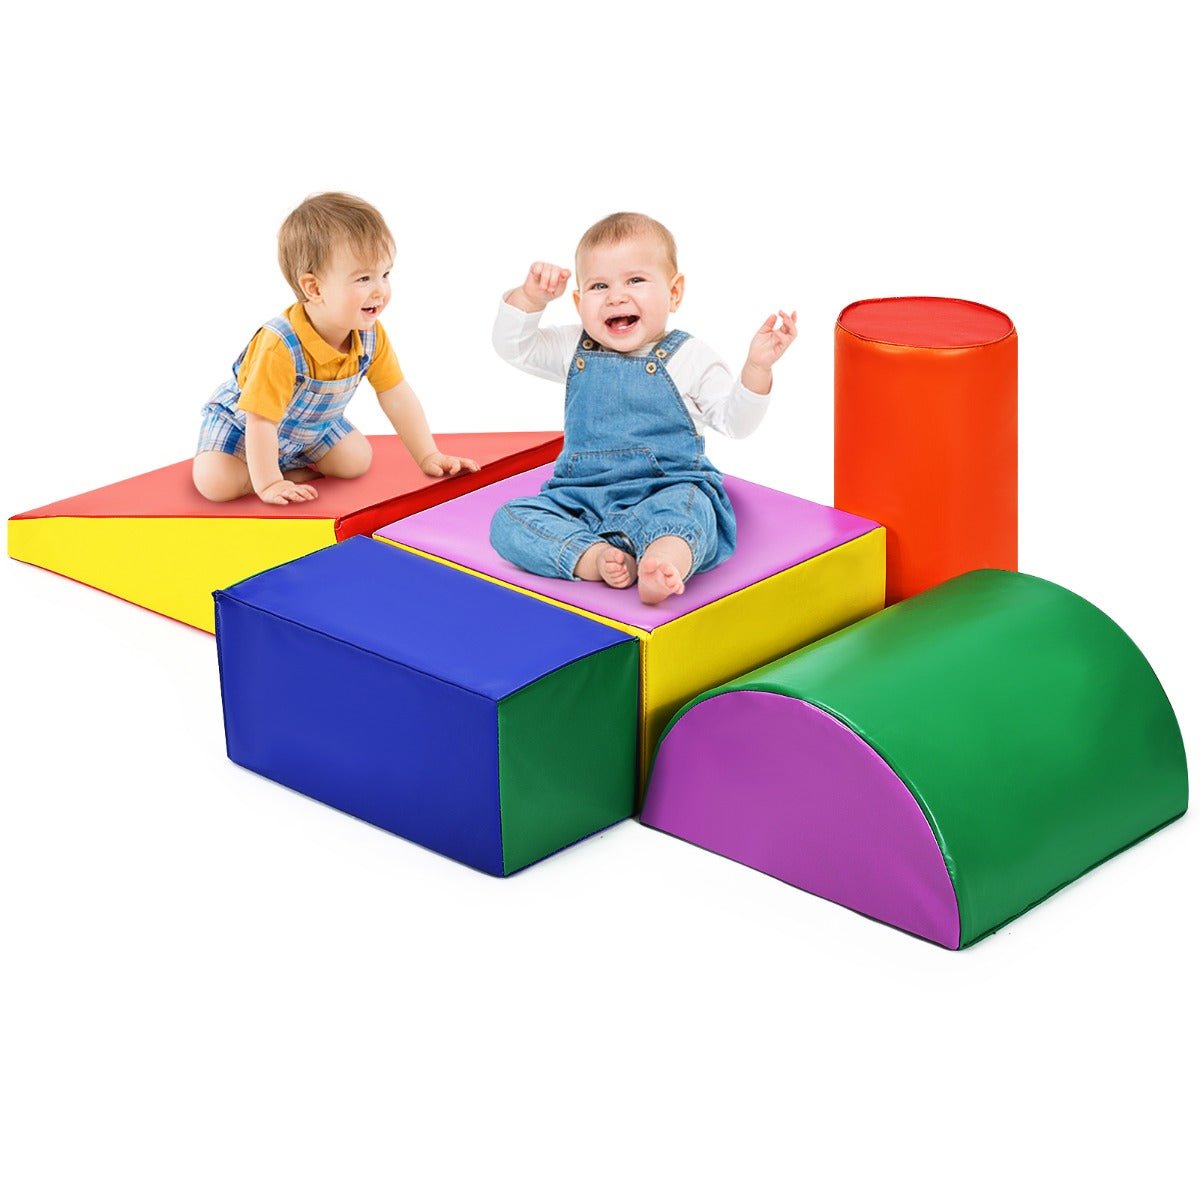 Safe and Exciting Playtime for Little Explorers